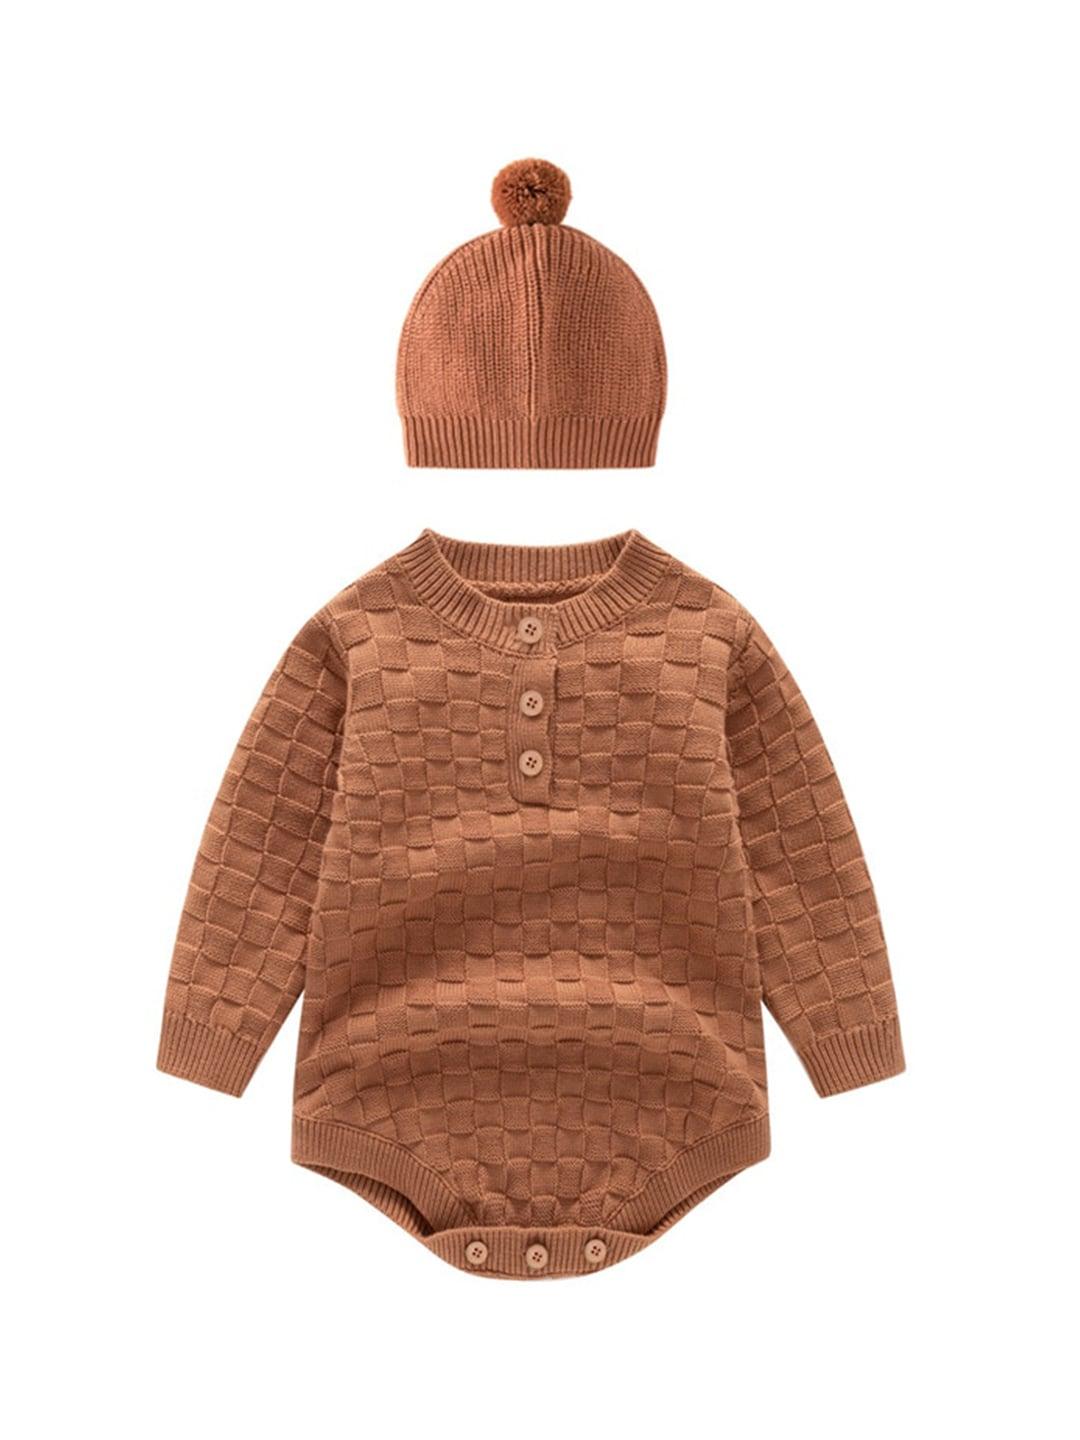 stylecast-brown-infant-kids-knitted-cotton-romper-with-beanie